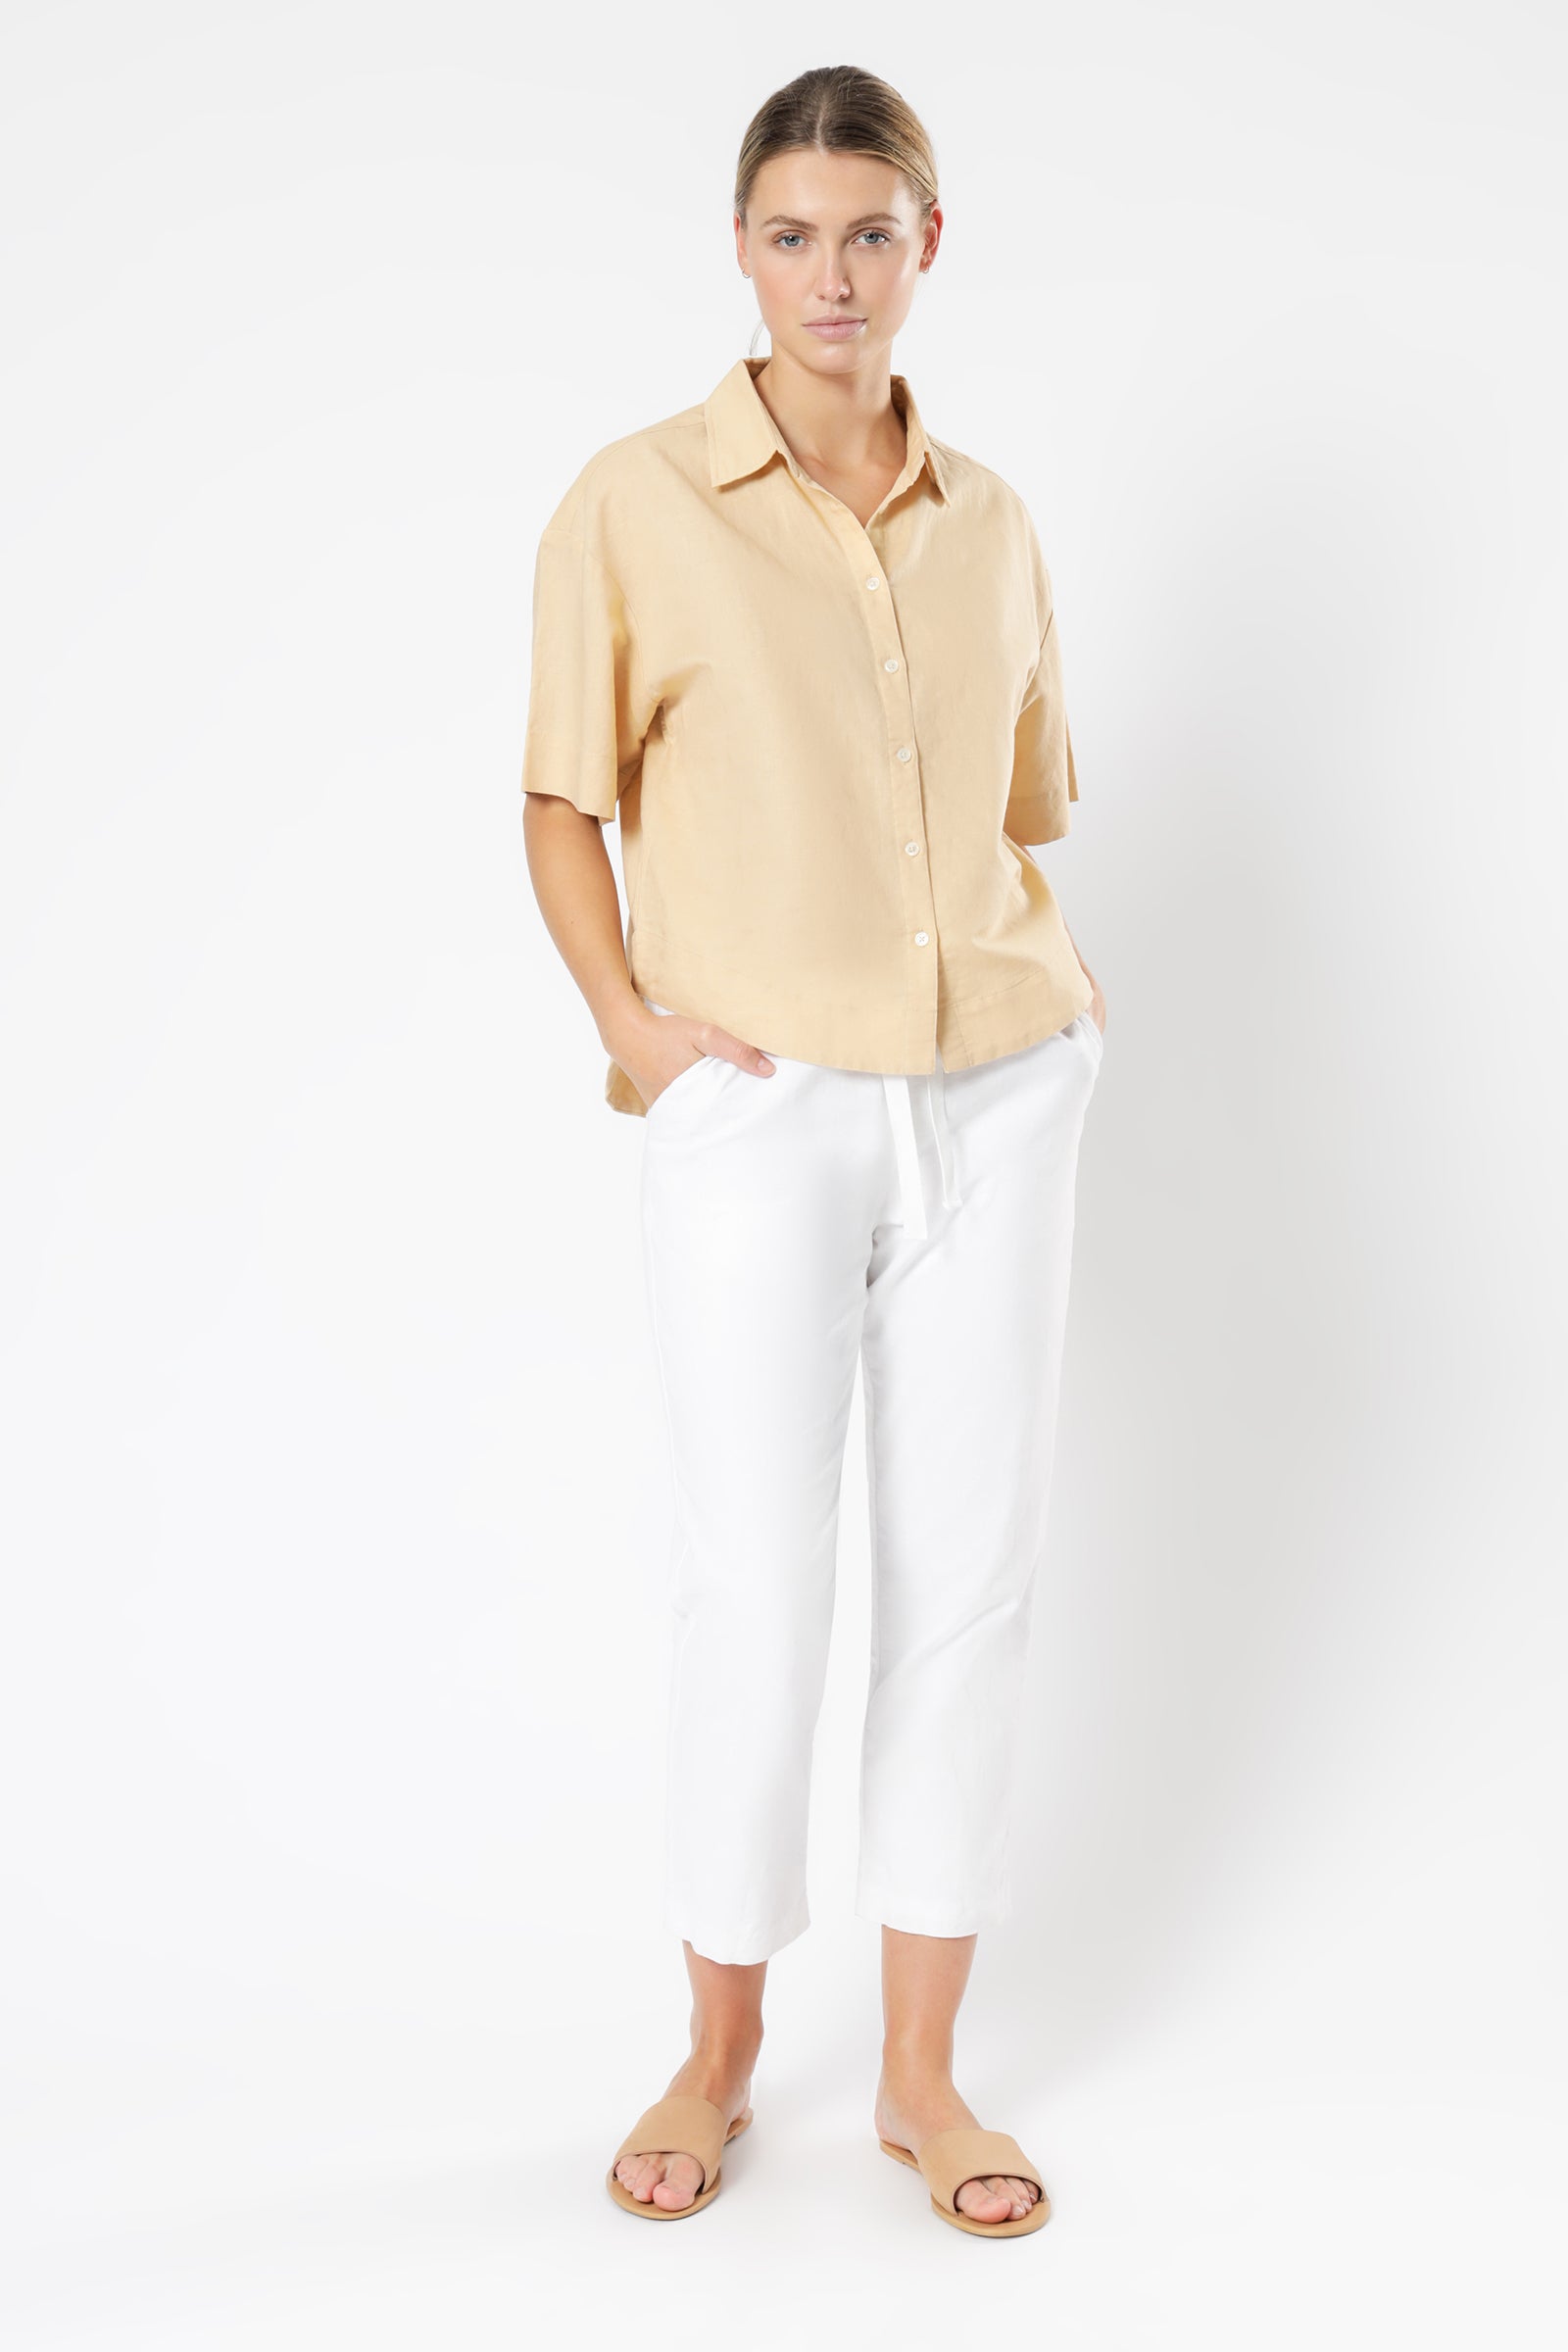 Nude Lucy Clement Linen Shirt Apricot Tees 